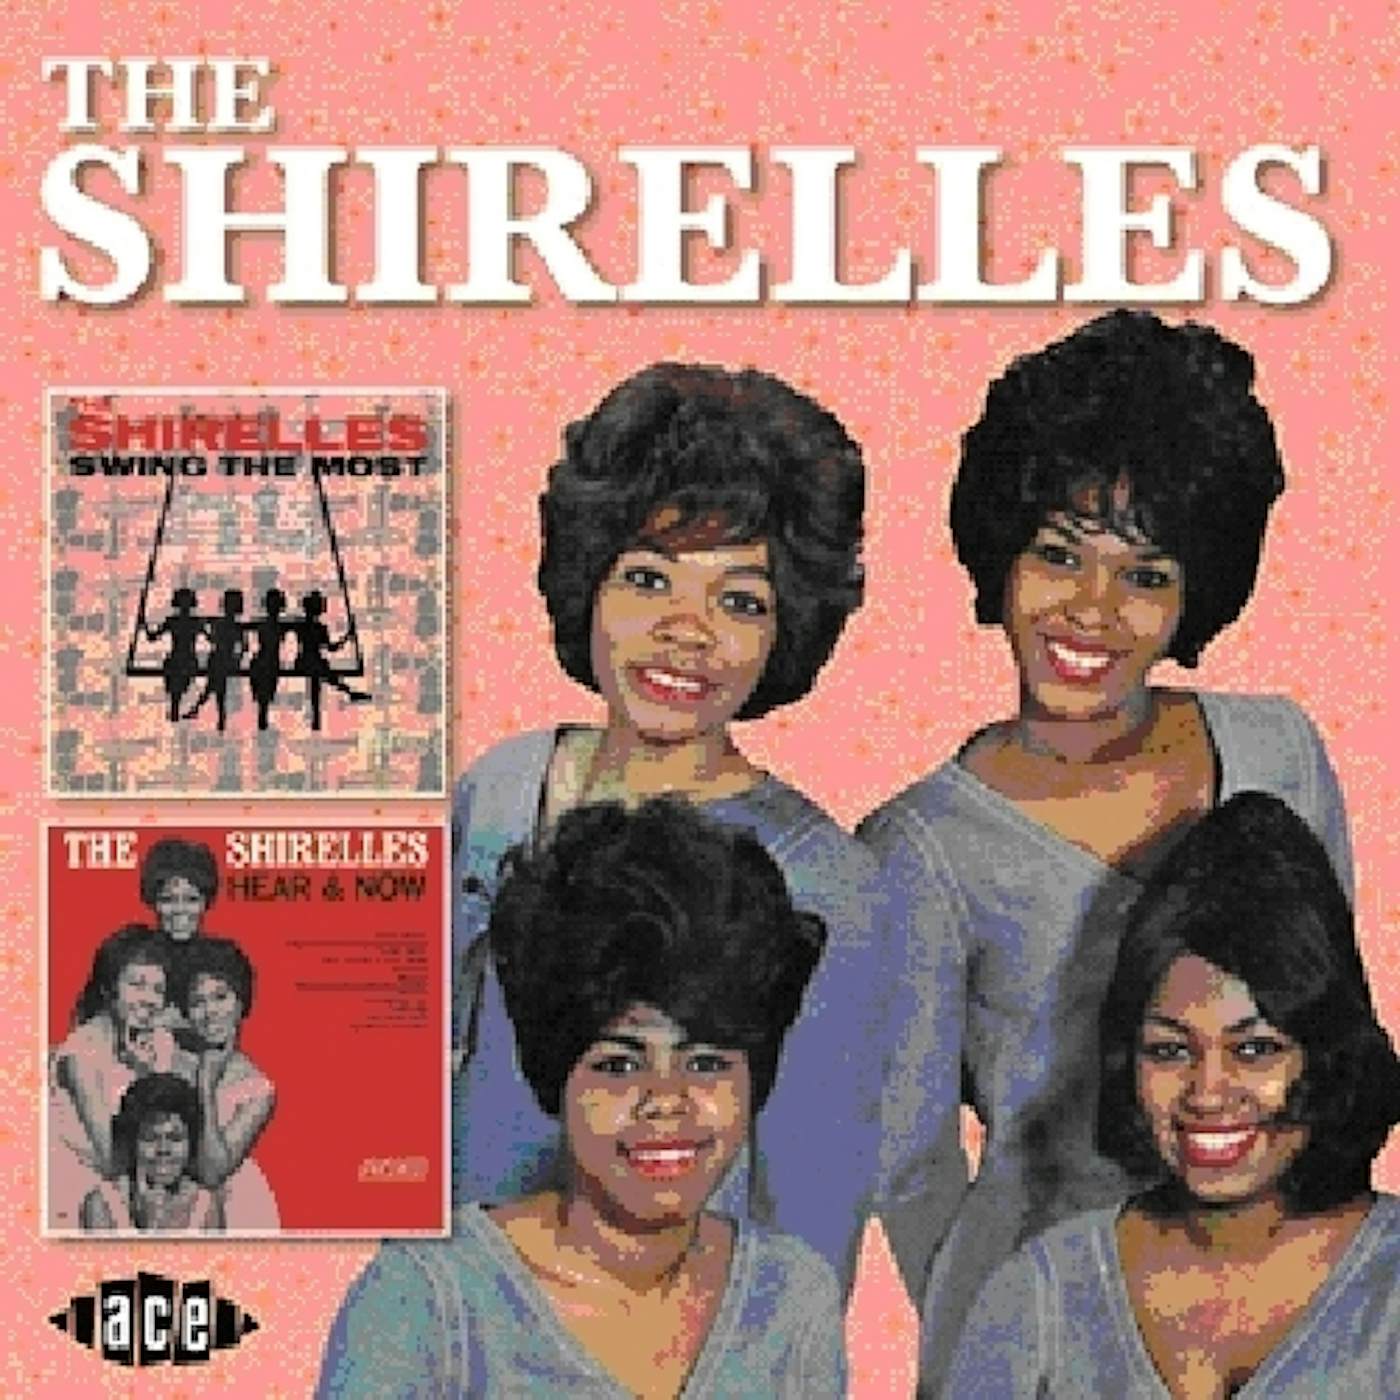 The Shirelles SWING THE MOST / HEAR & NOW CD